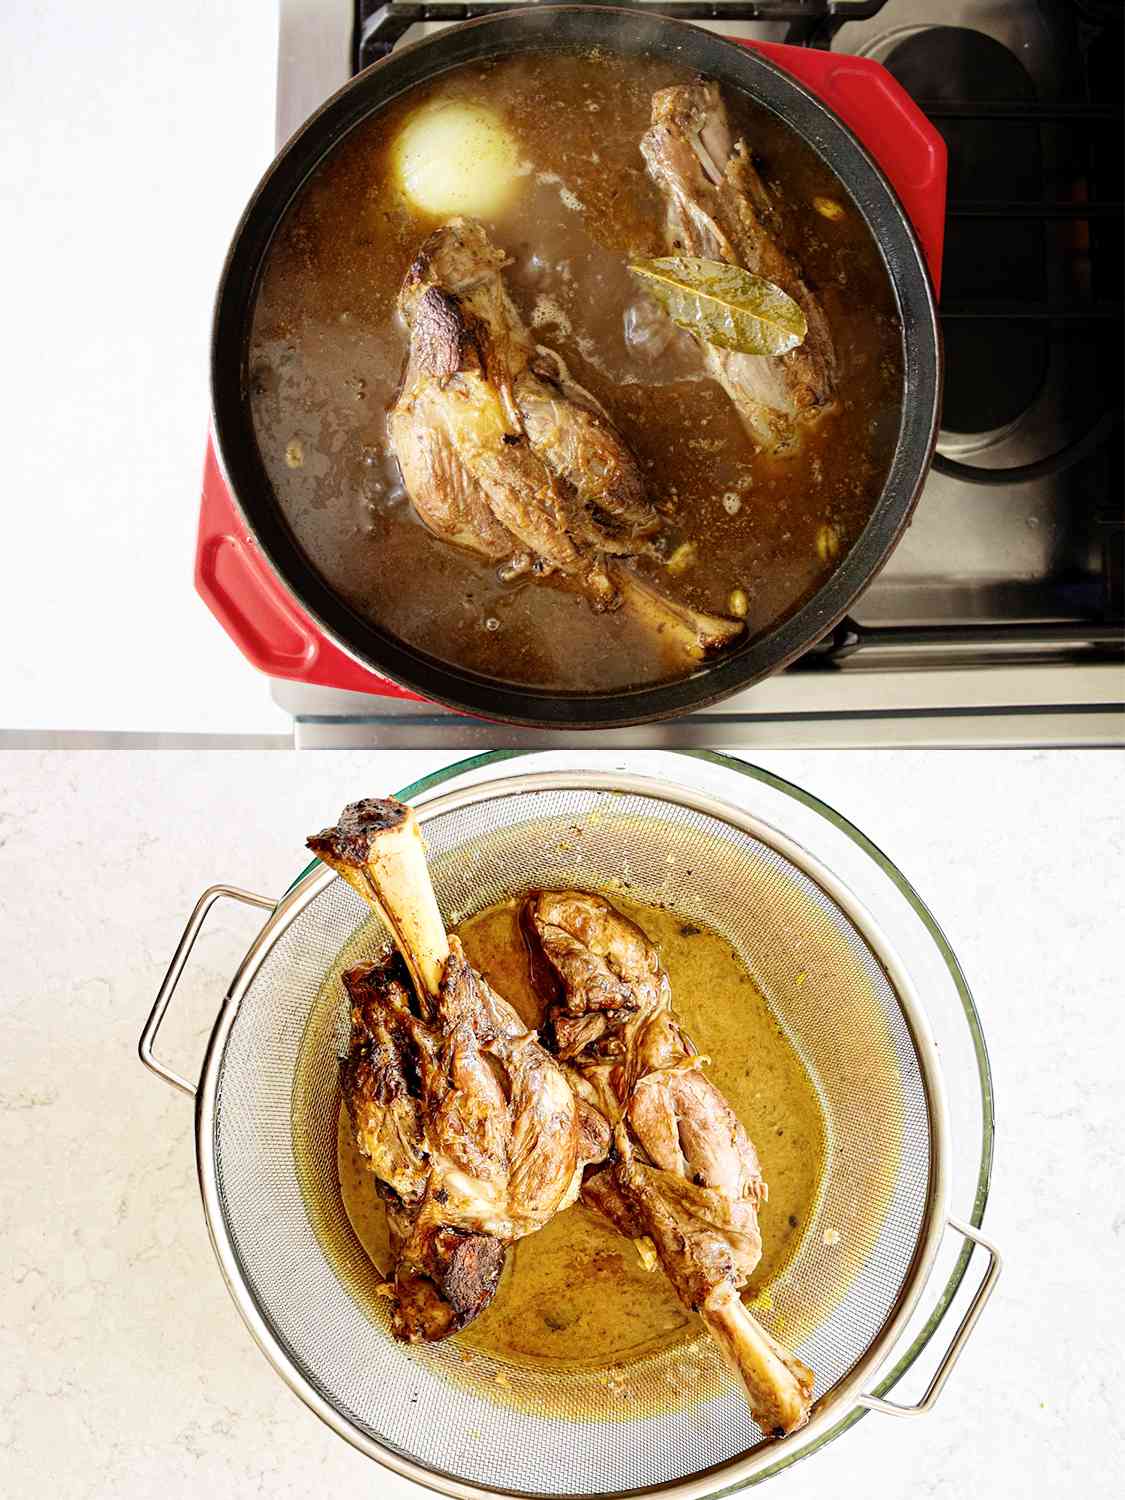 Two Image Collage. Top: Lamb cooking in the dutch oven on the stove. Bottom: Lamb being strained over a glass bowl